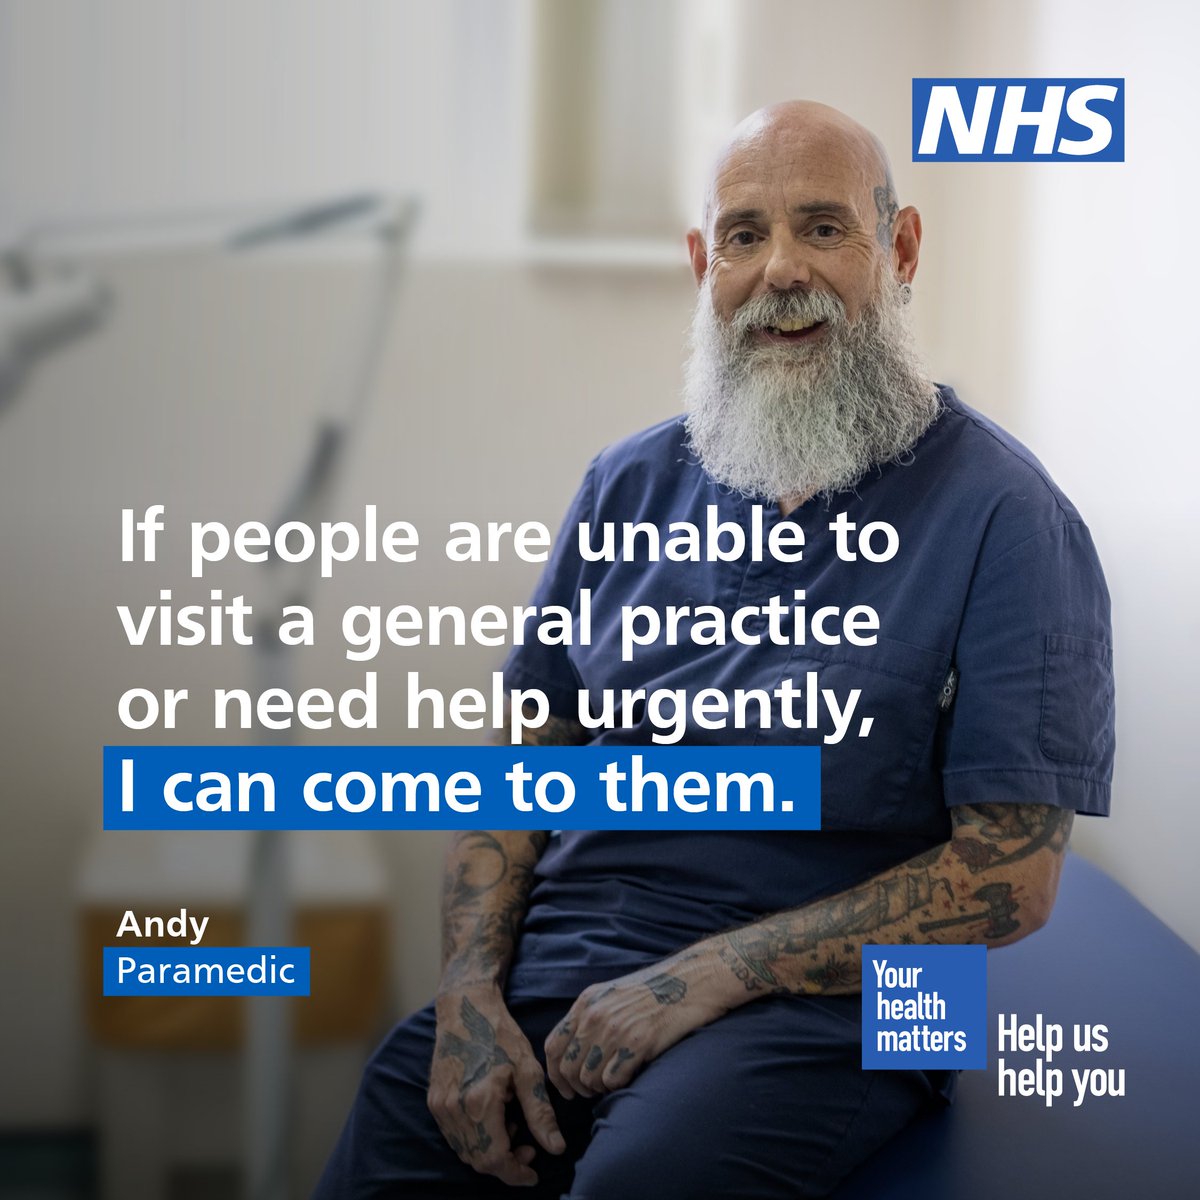 At many GP surgeries, there are a range of health professionals who can help you. A paramedic may be able to visit you at home if you’re unable to come into your practice. Your general practice team is here to help you. ➡️ orlo.uk/vsaEY